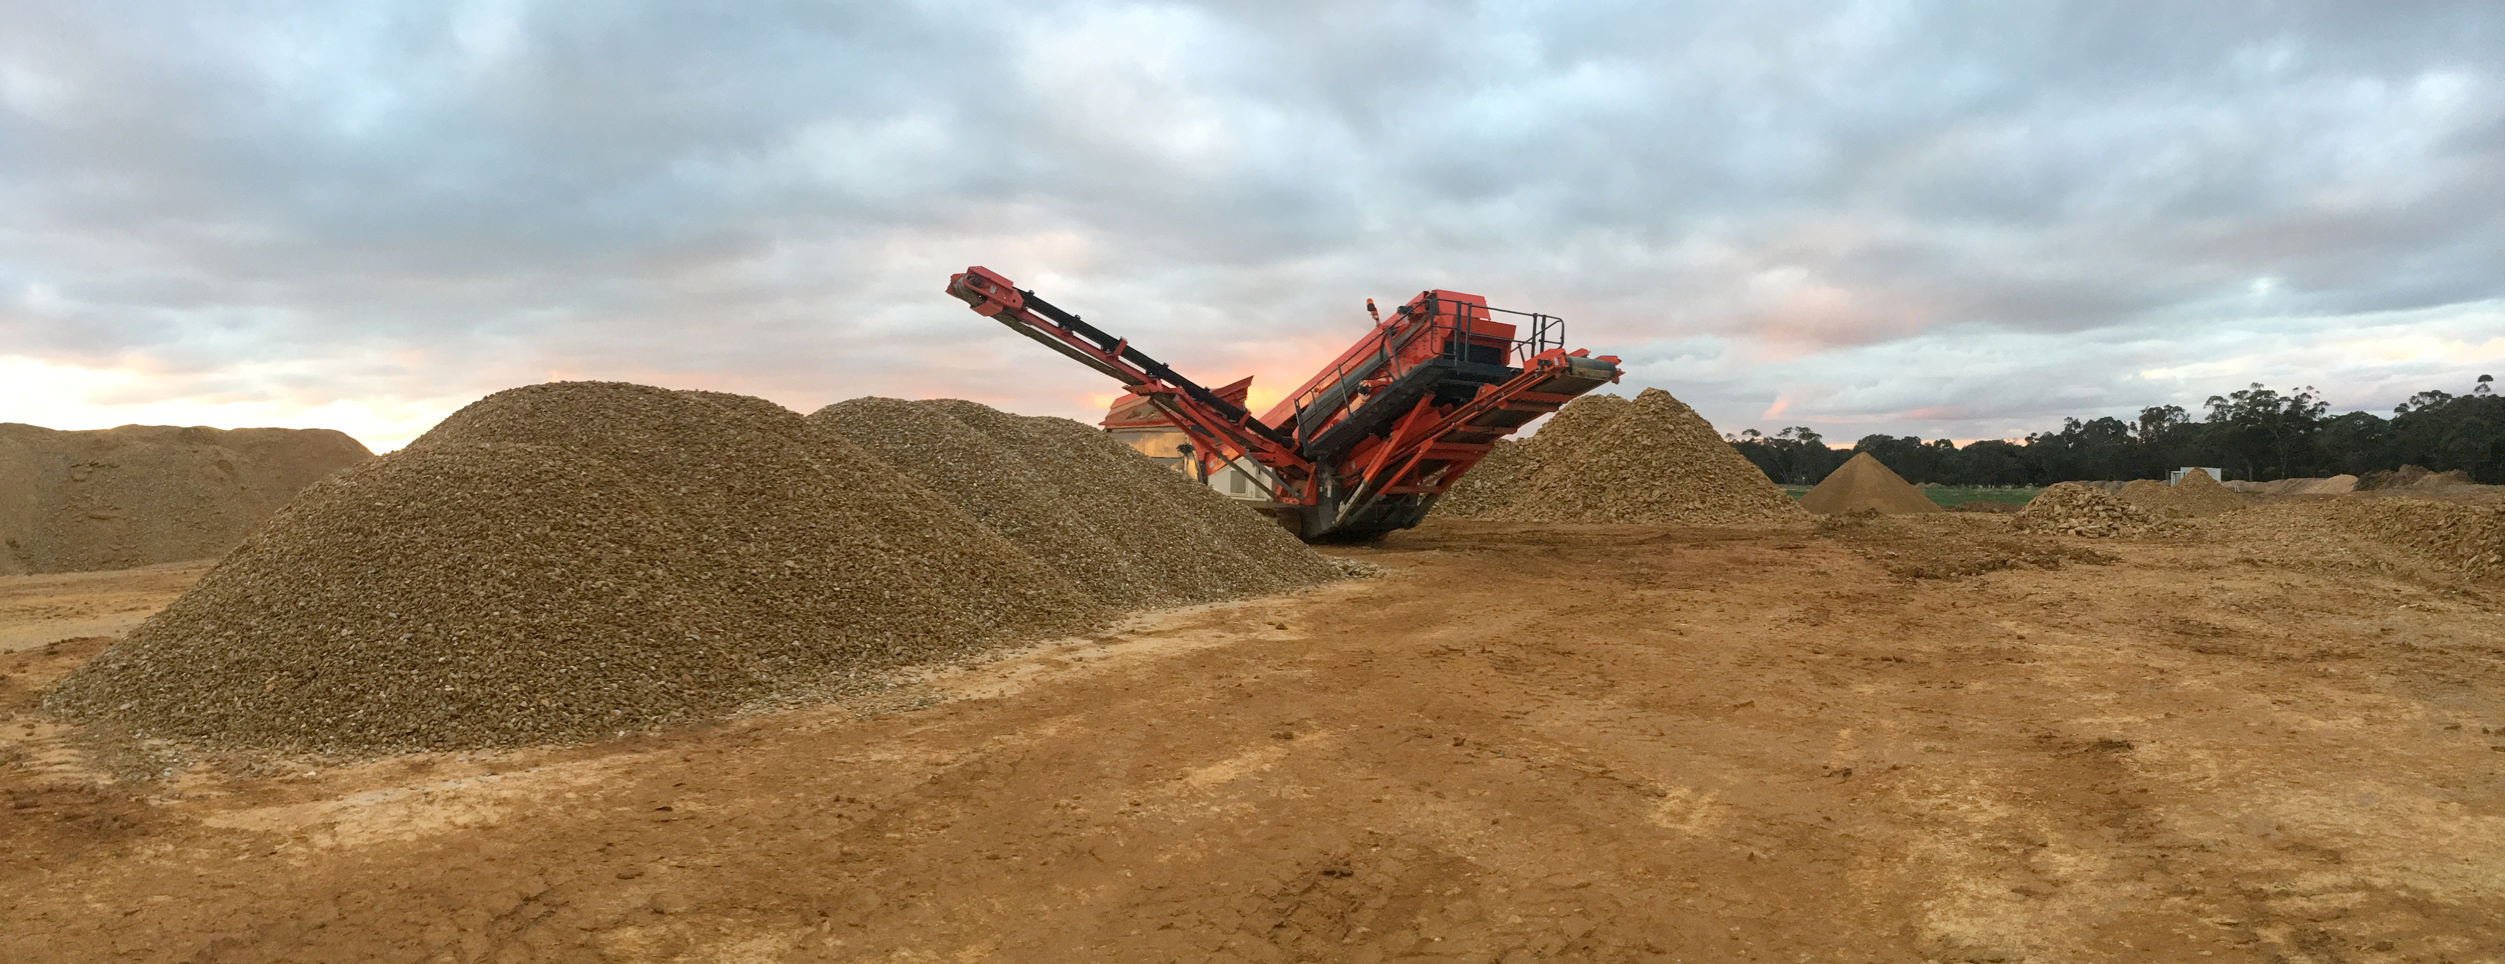 Provider of quality aggregates, sands, gravels and decorative pebbles